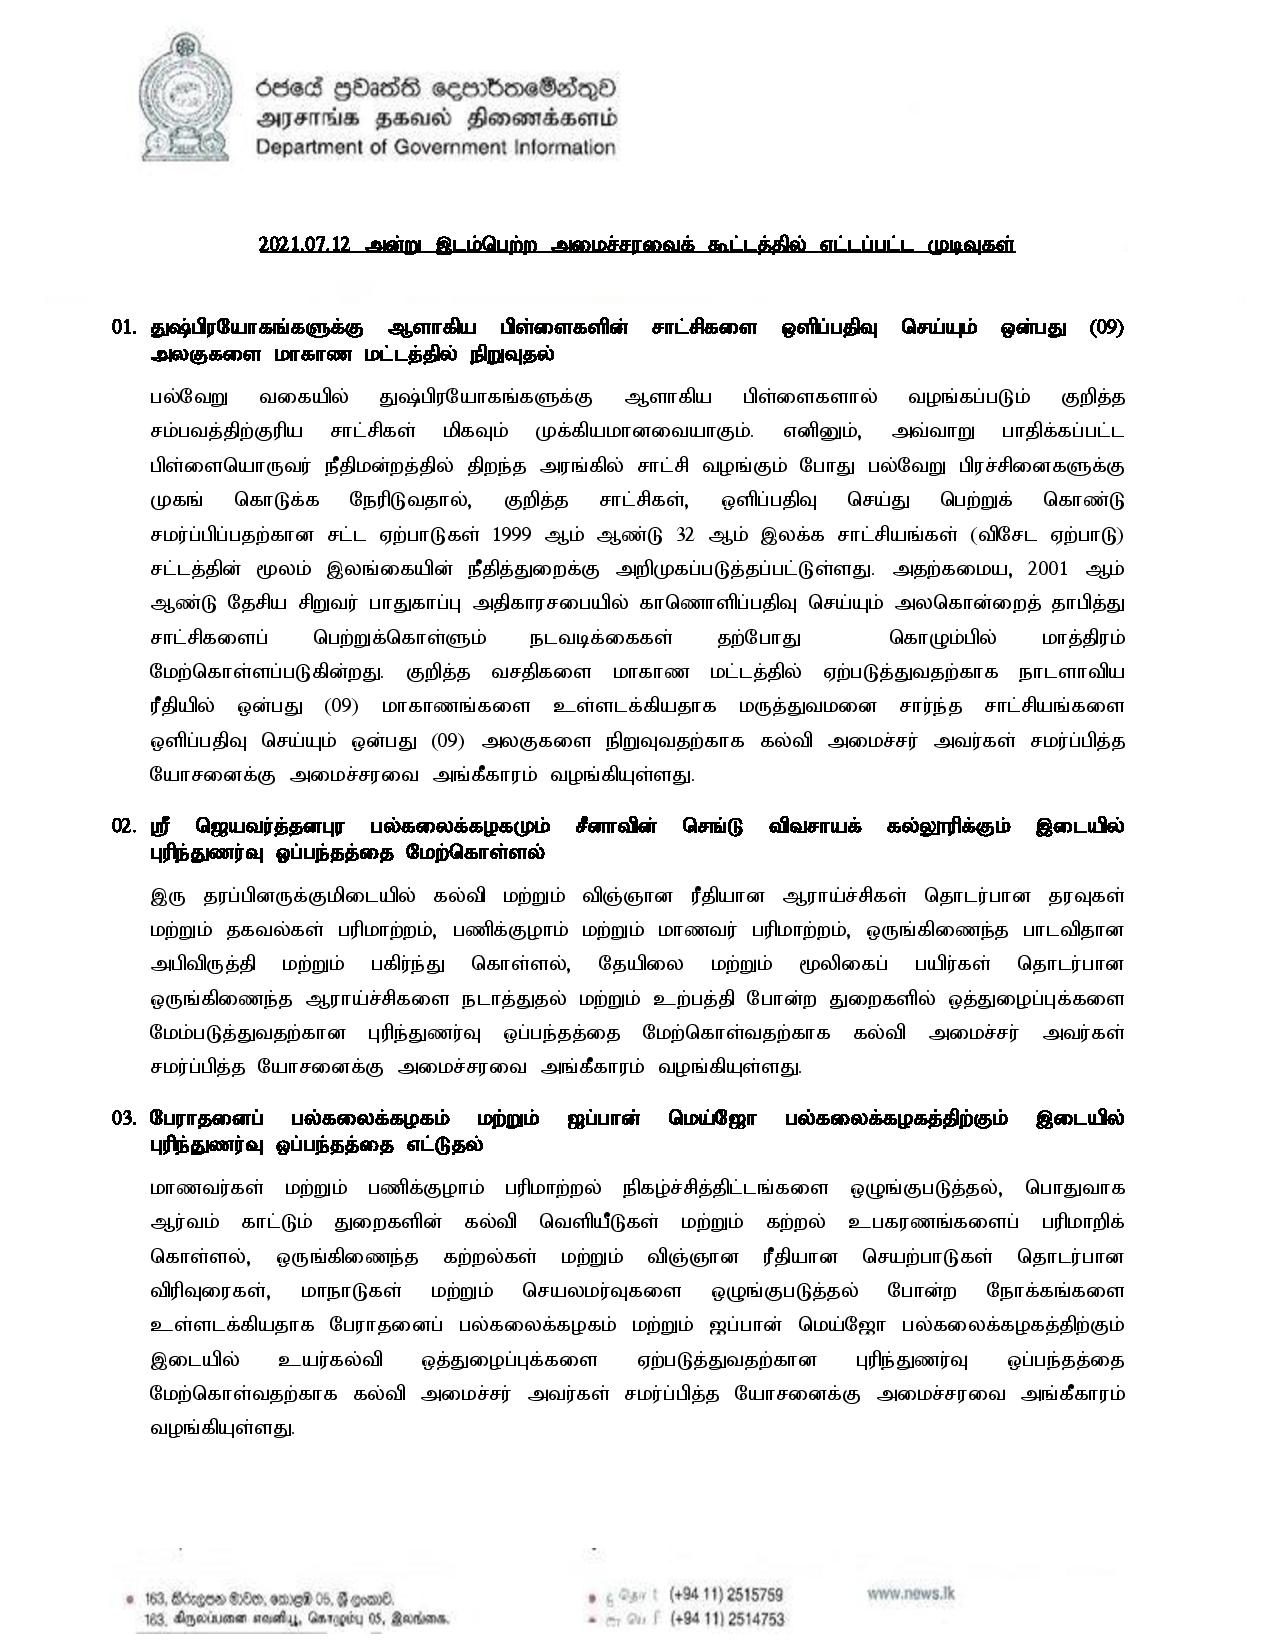 Cabinet Decision on 12.07.2021 Tamil page 001